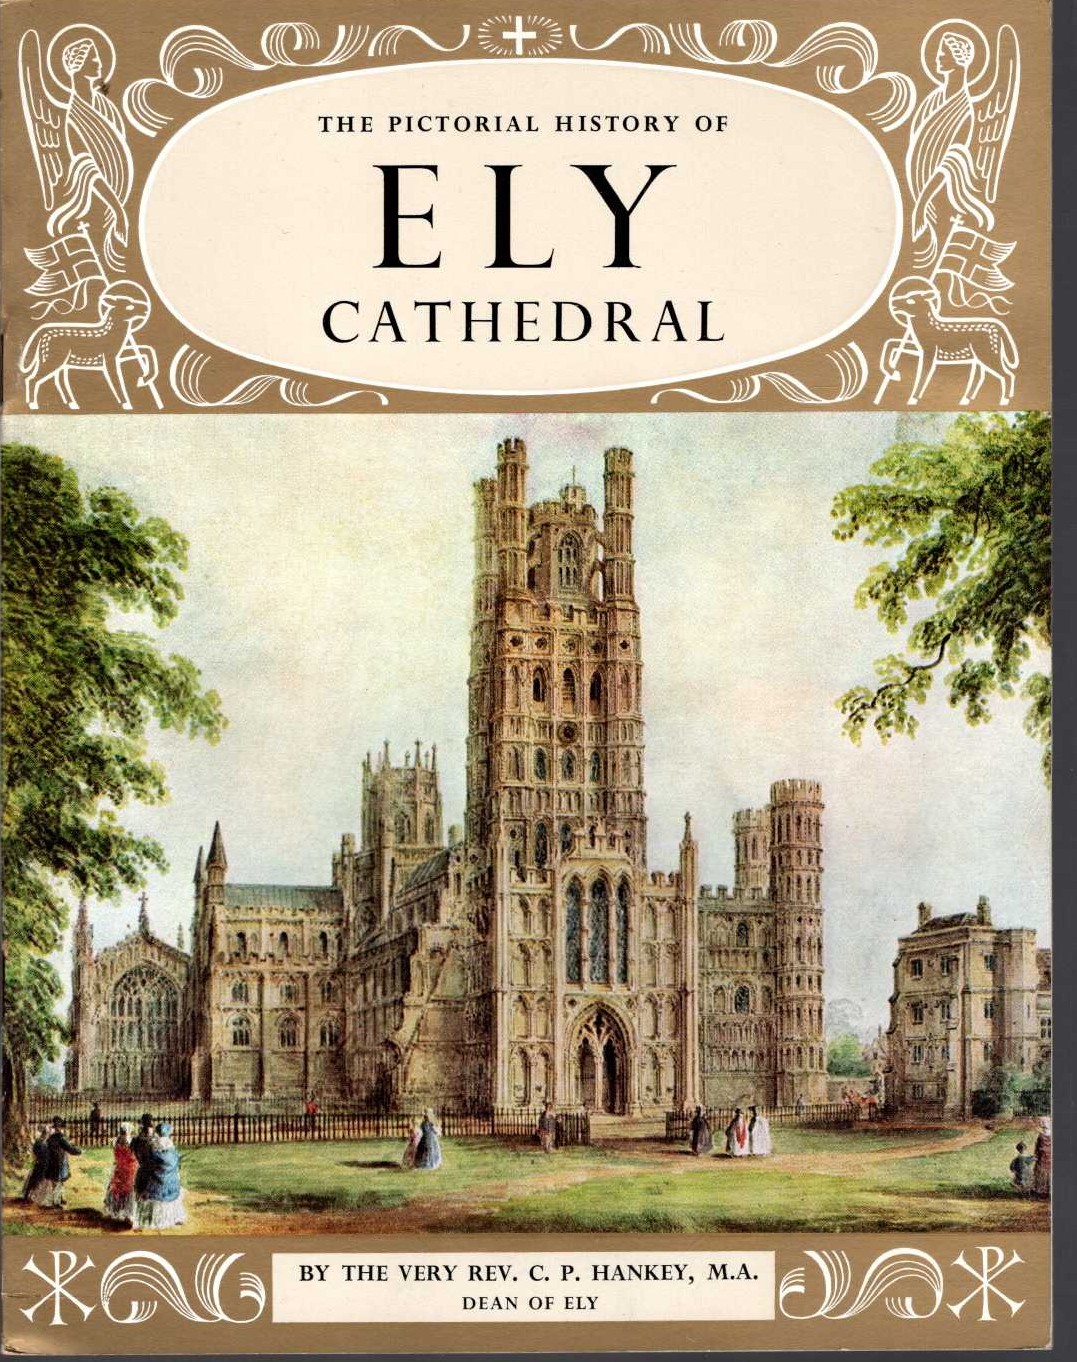 \ THE PICTORIAL GUIDE OF ELY CATHEDRAL by C.P.Hankey front book cover image